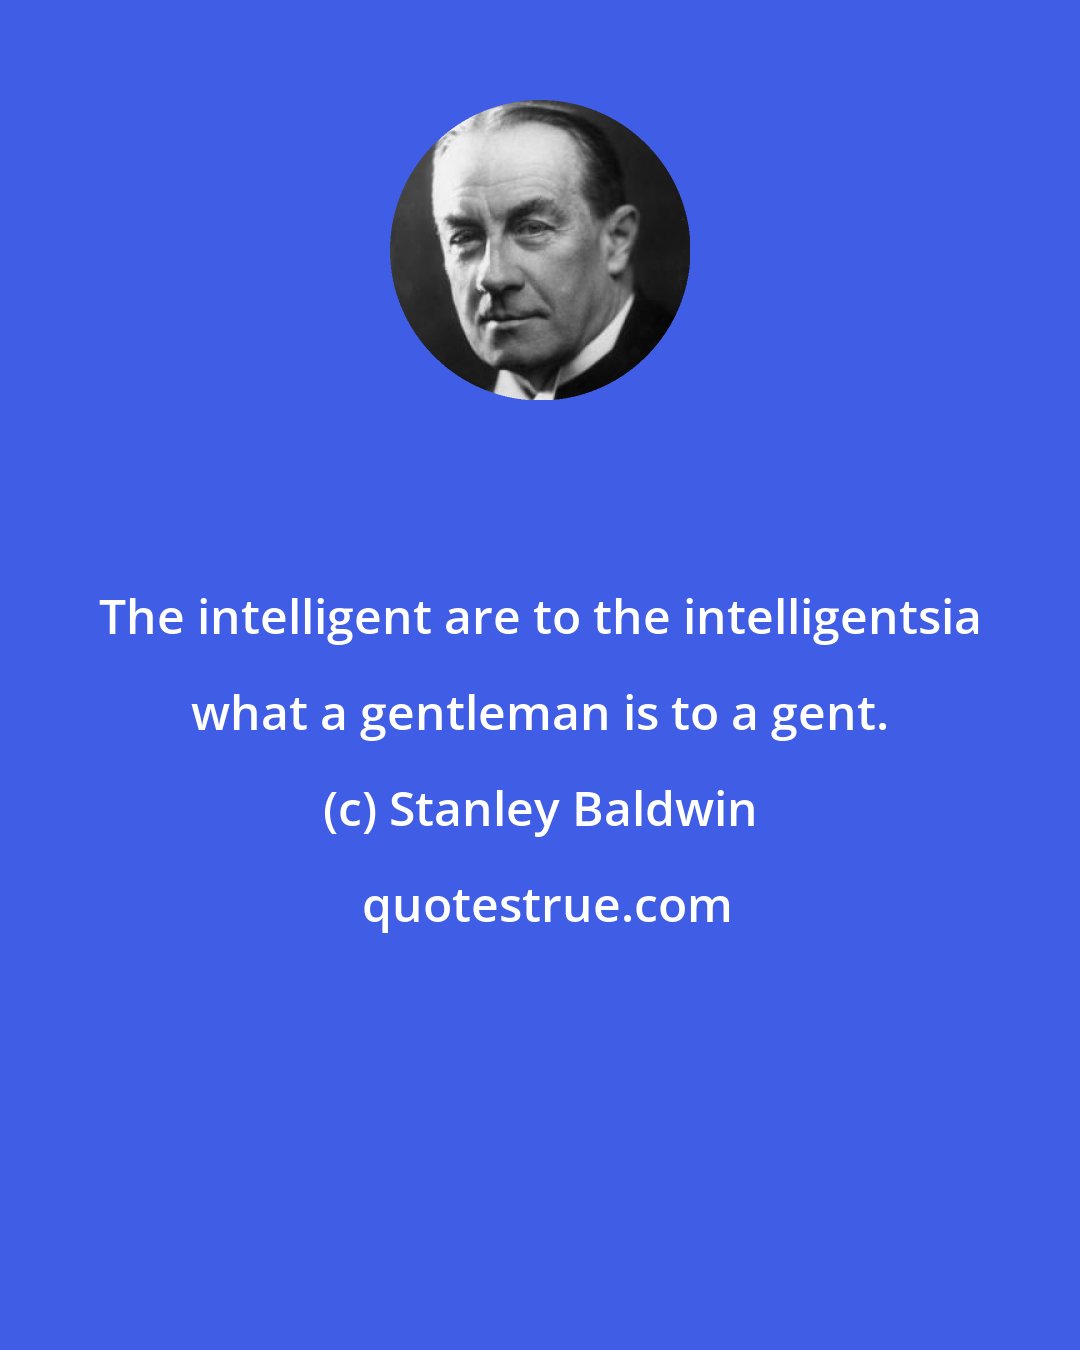 Stanley Baldwin: The intelligent are to the intelligentsia what a gentleman is to a gent.